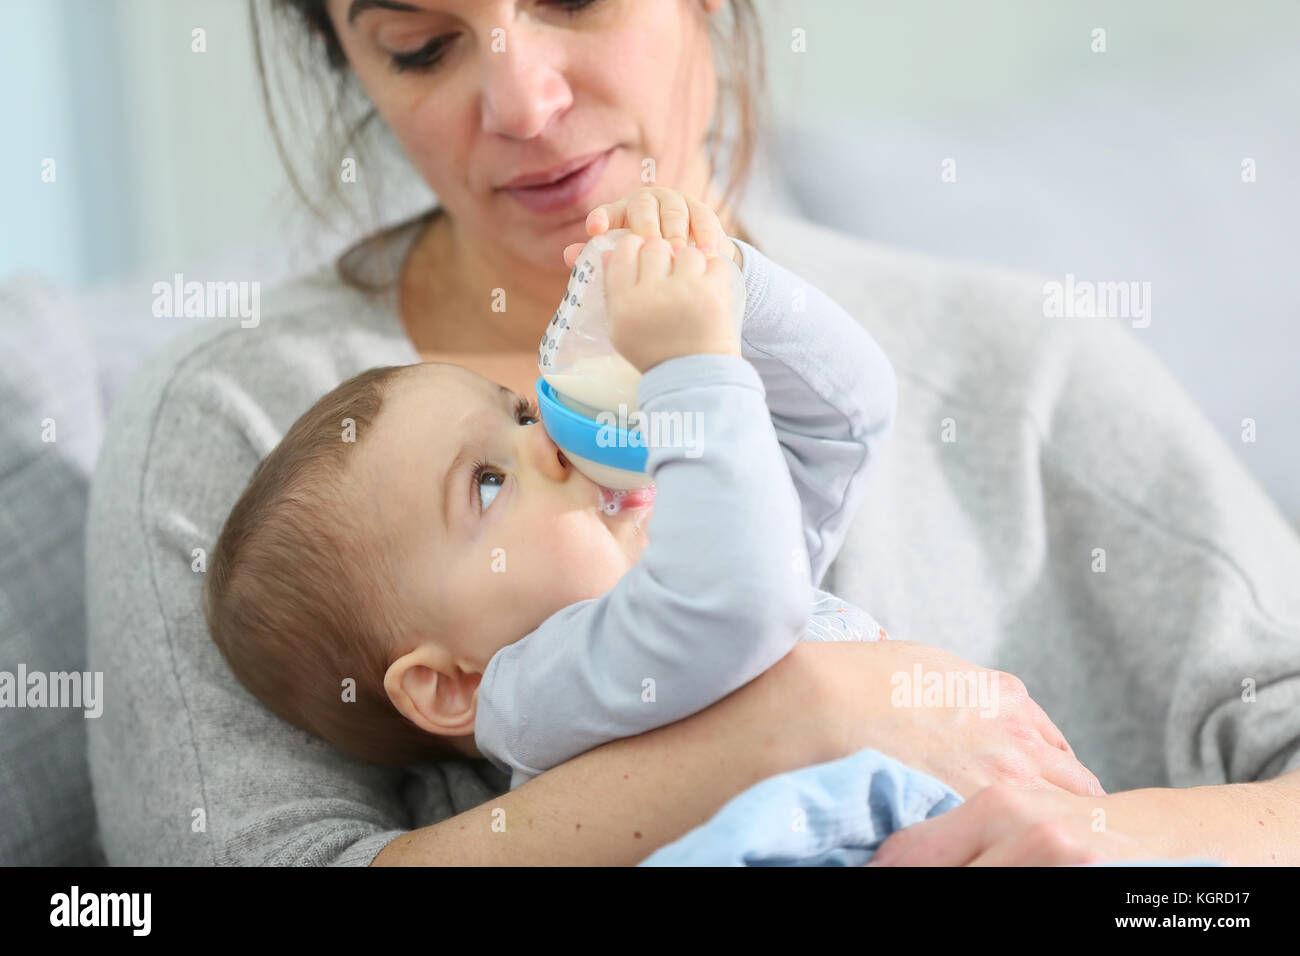 Mother and baby boy holding baby bottle Stock Photo